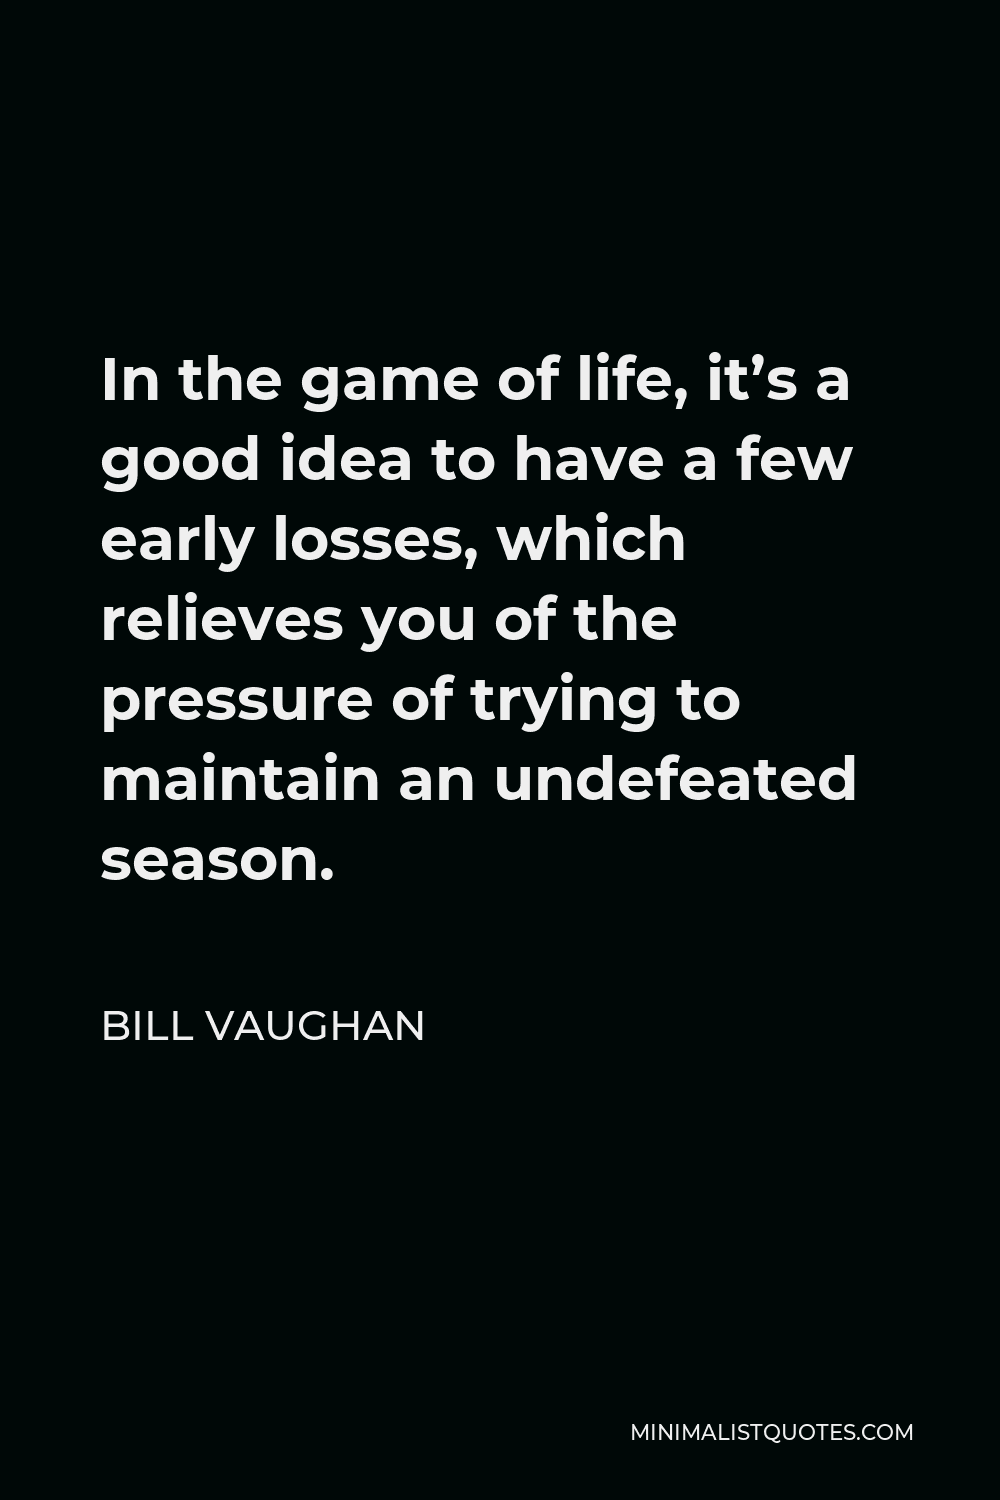 Bill Vaughan Quote - In the game of life, it’s a good idea to have a few early losses, which relieves you of the pressure of trying to maintain an undefeated season.